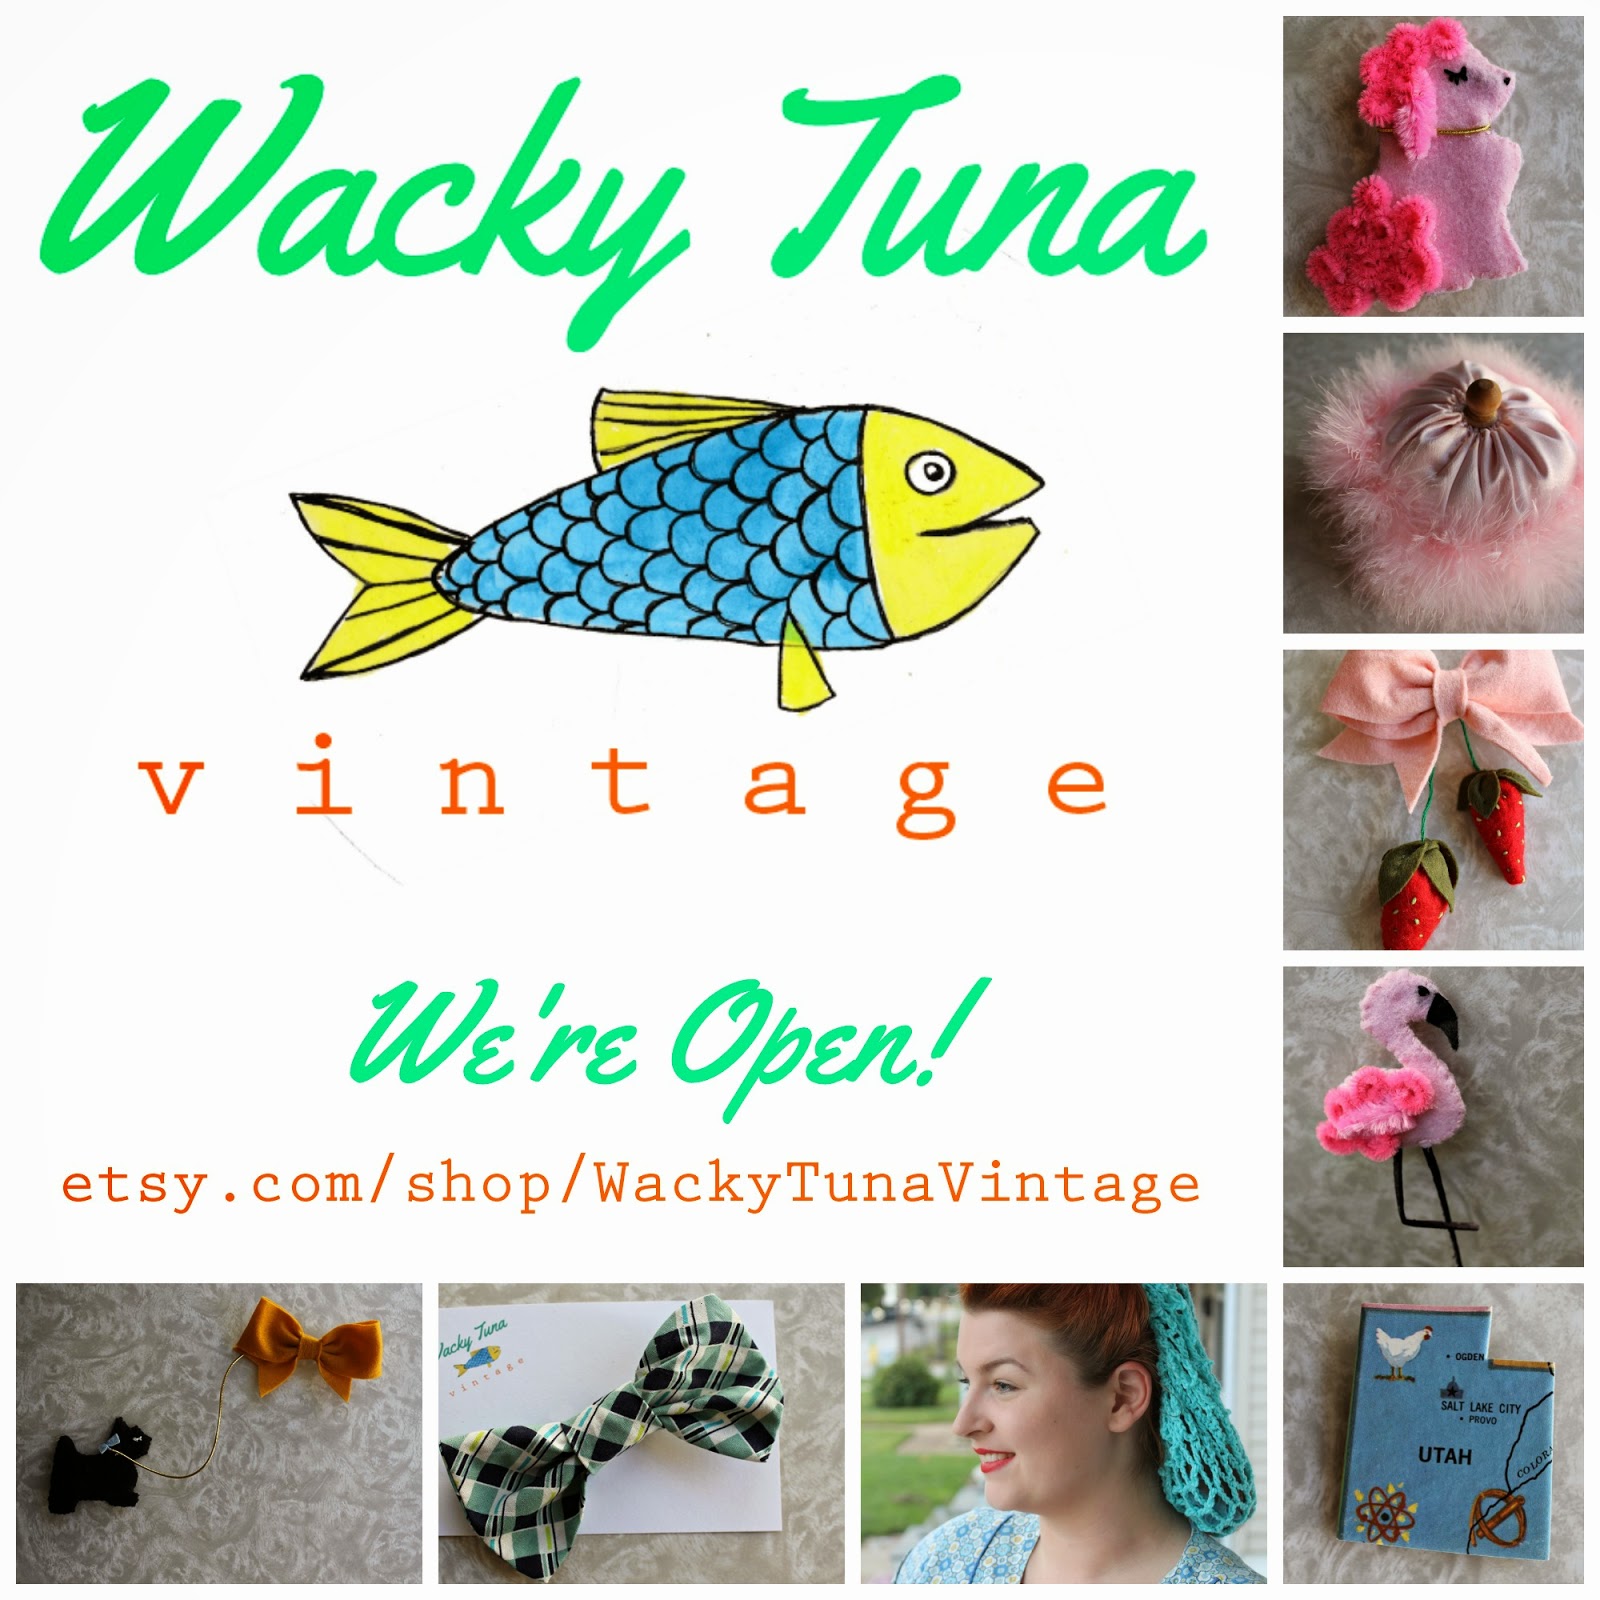 vintage felt brooches, snoods and scarves from wacky tuna vintage on etsy